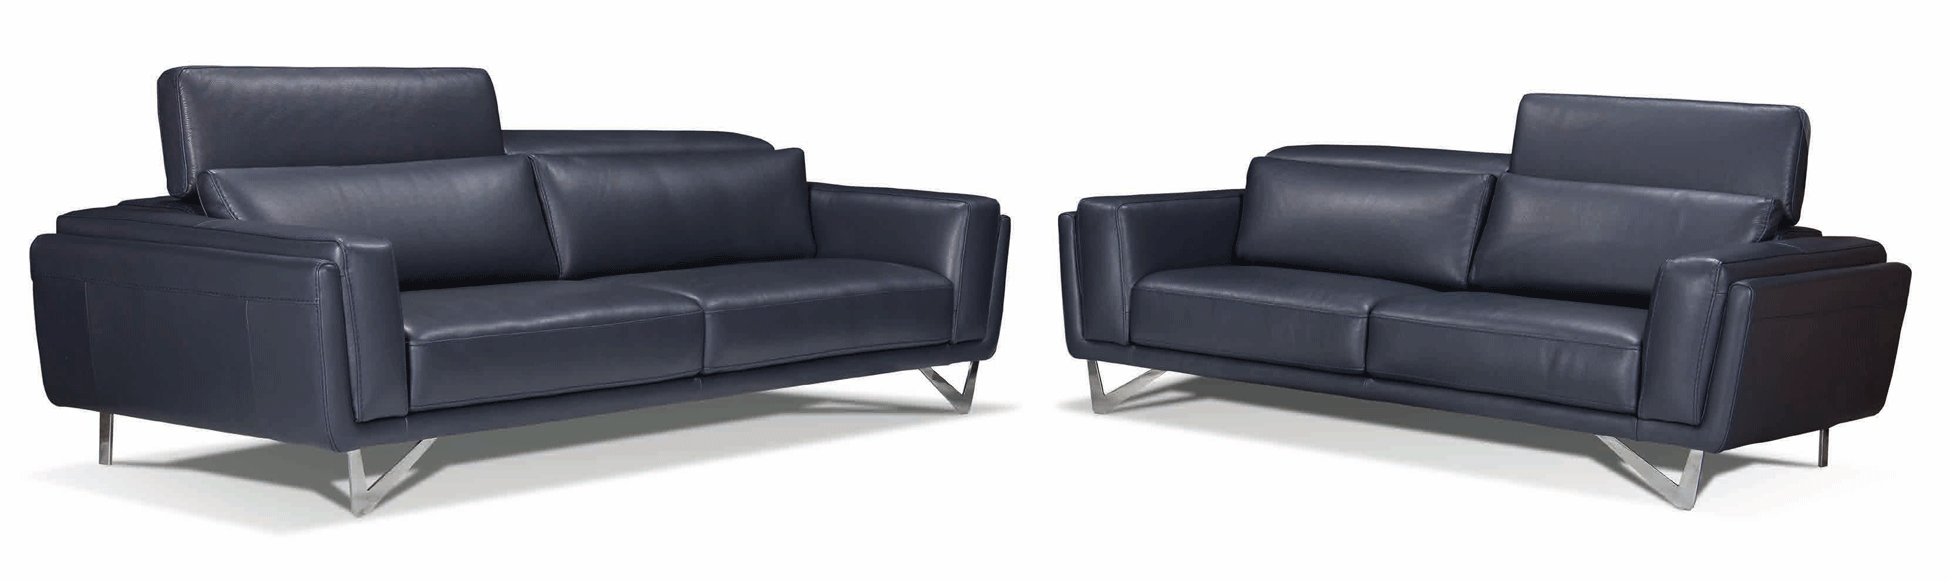 Living Room Furniture Reclining and Sliding Seats Sets Trieste Living